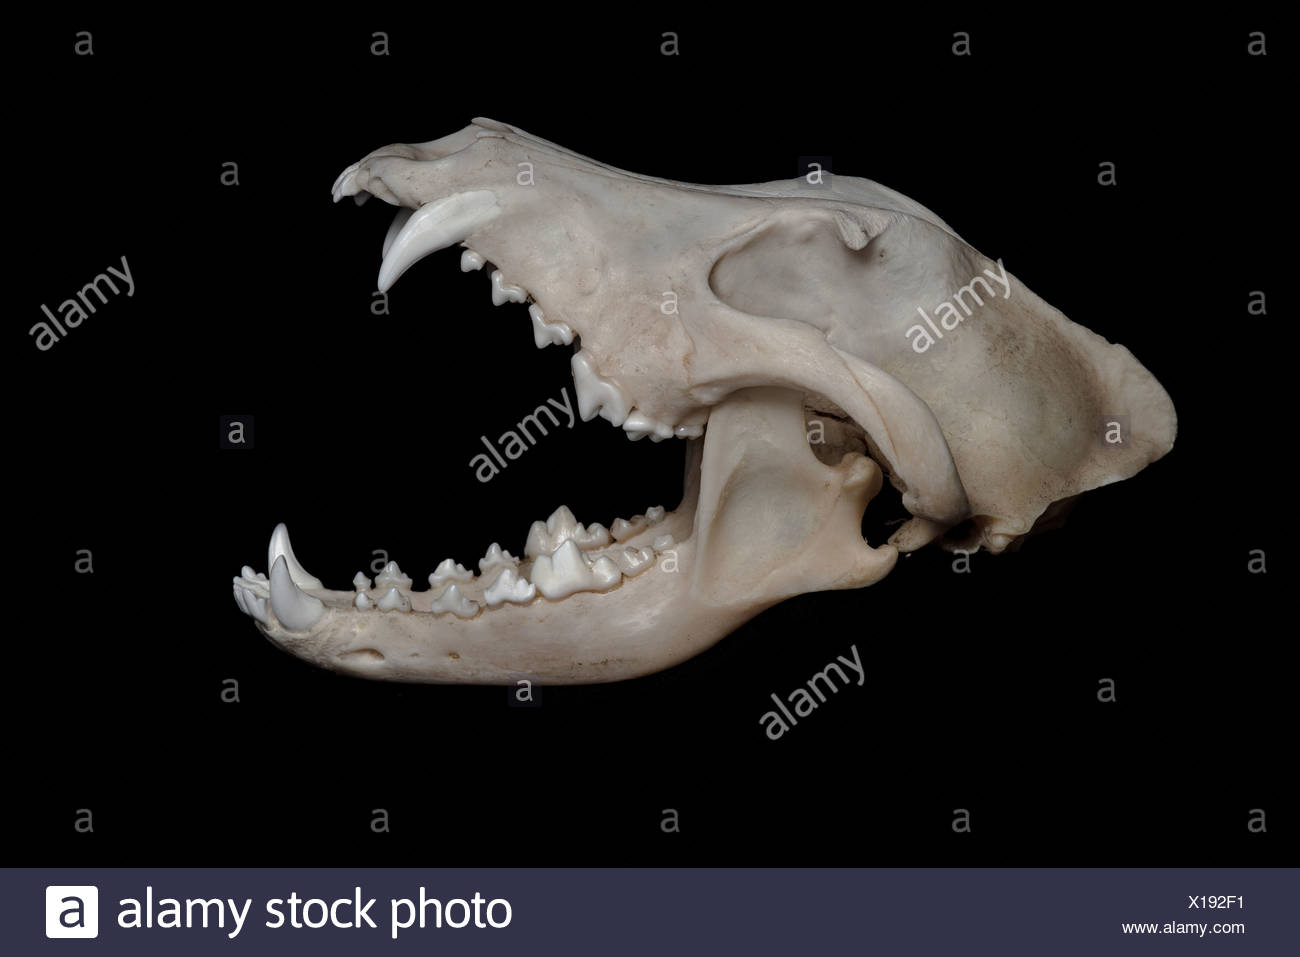 Skull Of Wolf Canis Lupus In Front Of Black Background Side View